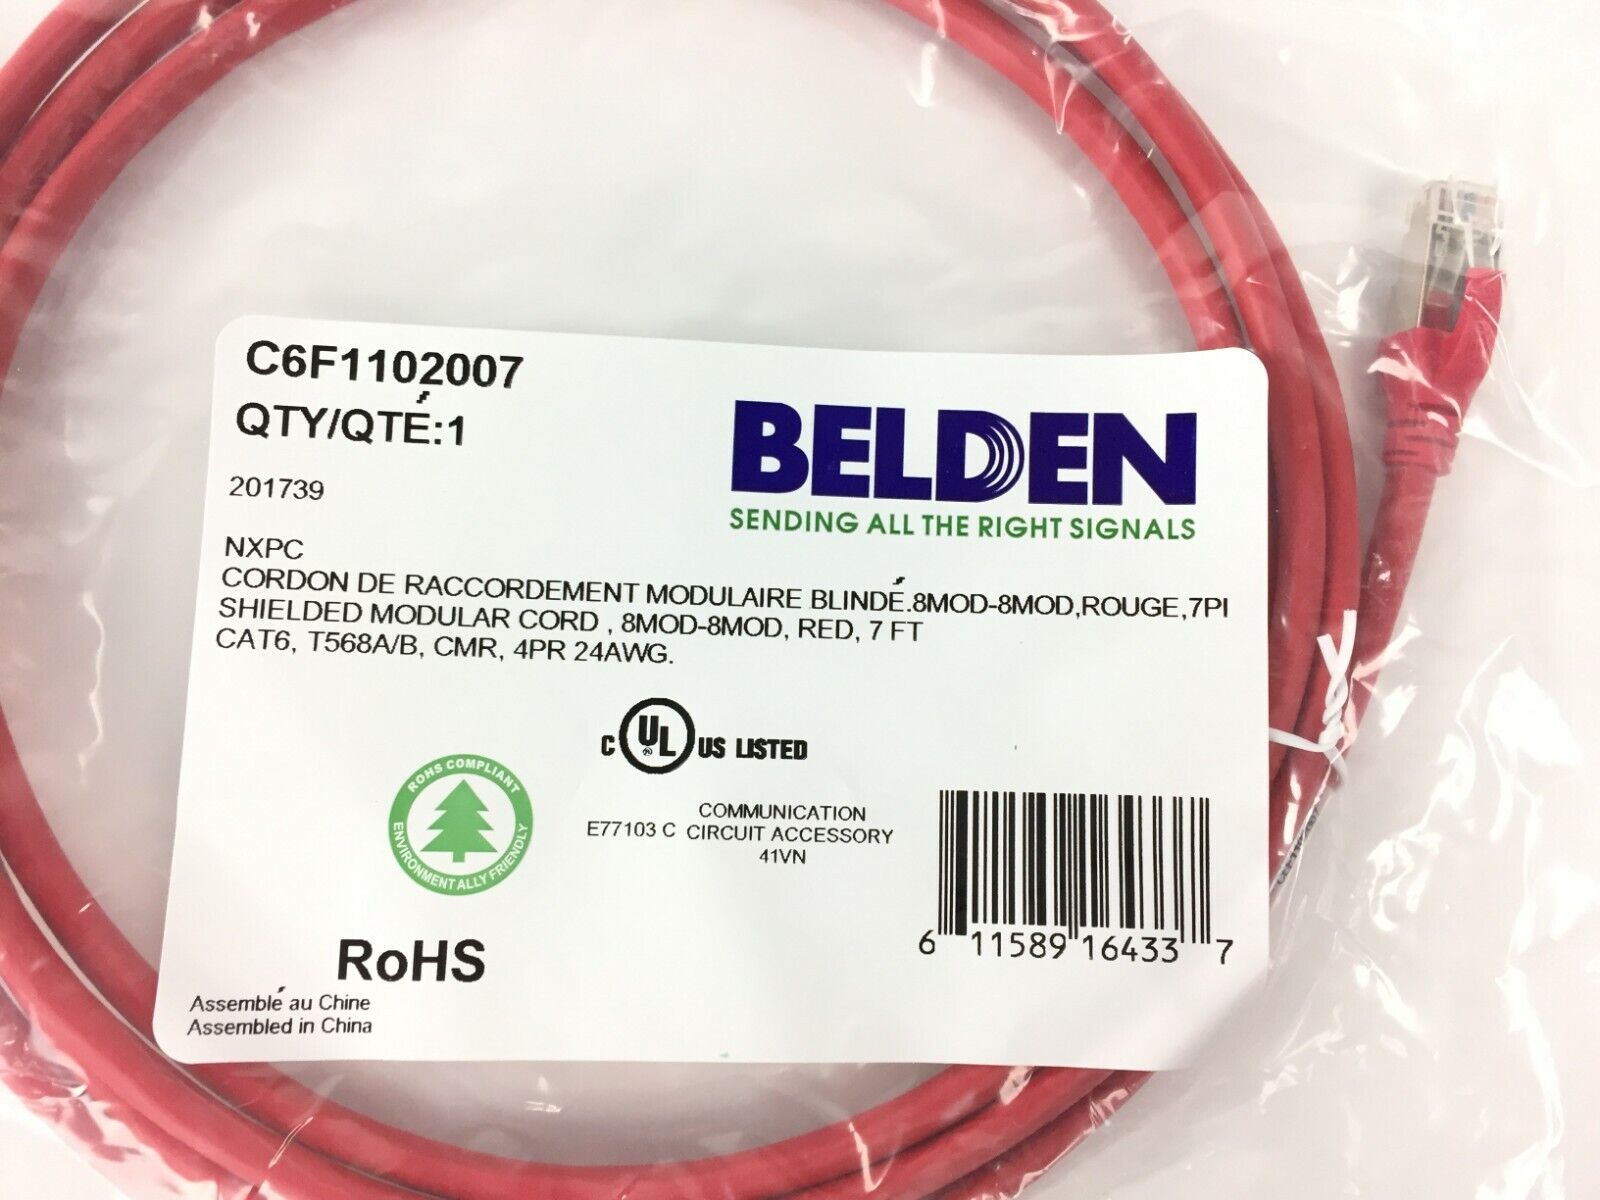 Belden Eithernet CAT6 Patch Cord 7ft (Red) C6F1102007 201739